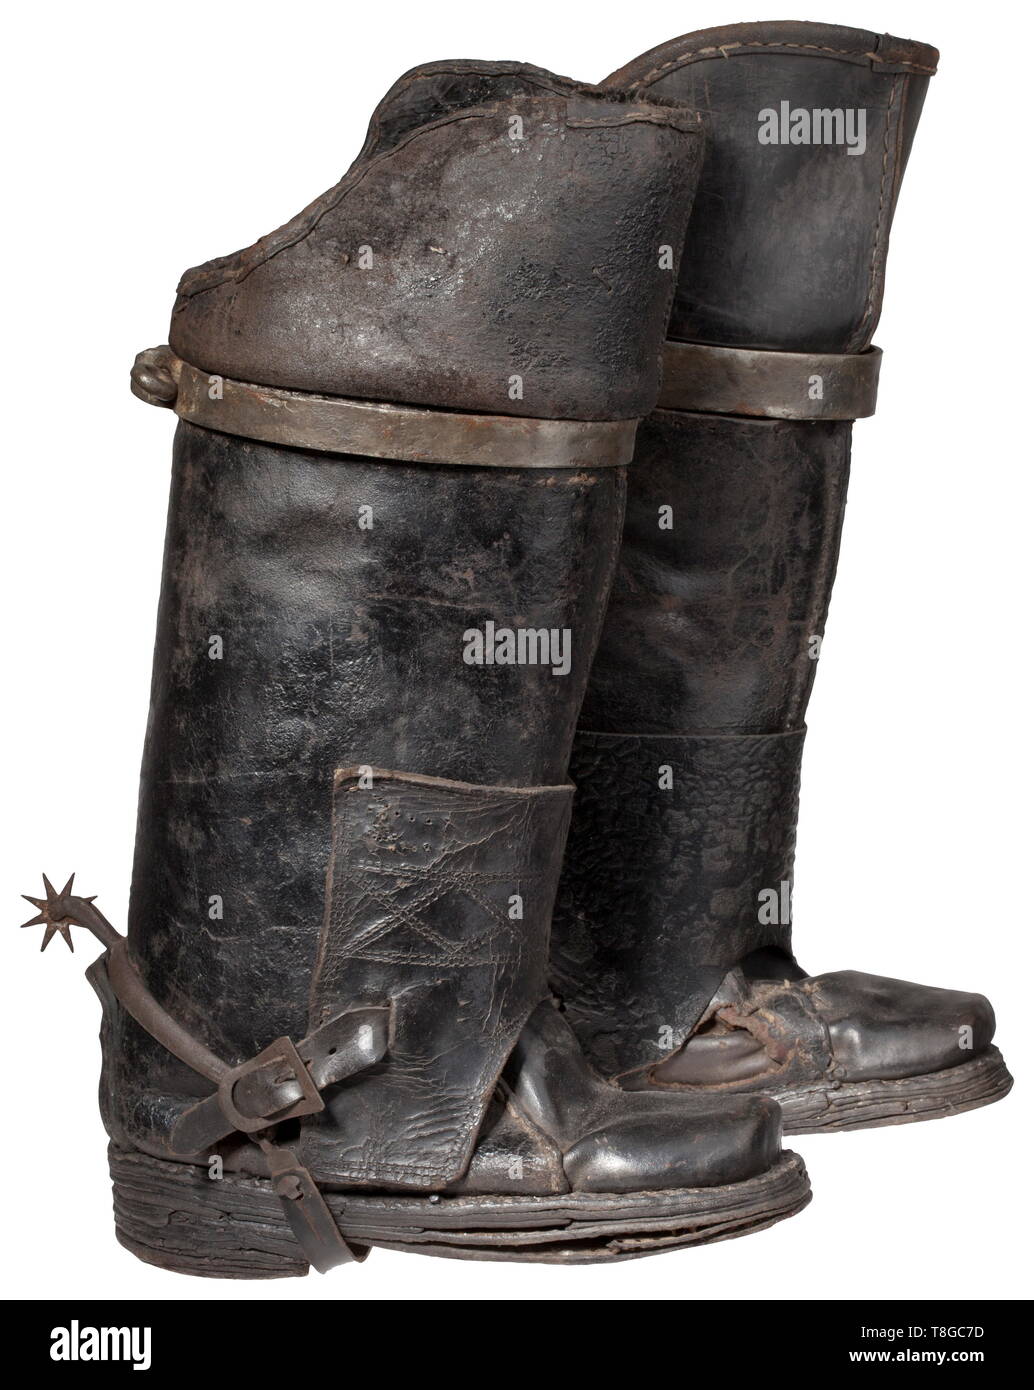 A pair of heavy riding boots, early 18th century Blackened leather, the strap-on gaiters with wheel spurs at back, the bootlegs reinforced with iron ferrules below the openings. Height 54 cm. A rare pair of boots in remarkably good condition. historic, historical, defensive arms, weapons, arms, weapon, arm, fighting device, object, objects, stills, clipping, clippings, cut out, cut-out, cut-outs, utensil, piece of equipment, utensils, 18th century, Additional-Rights-Clearance-Info-Not-Available Stock Photo